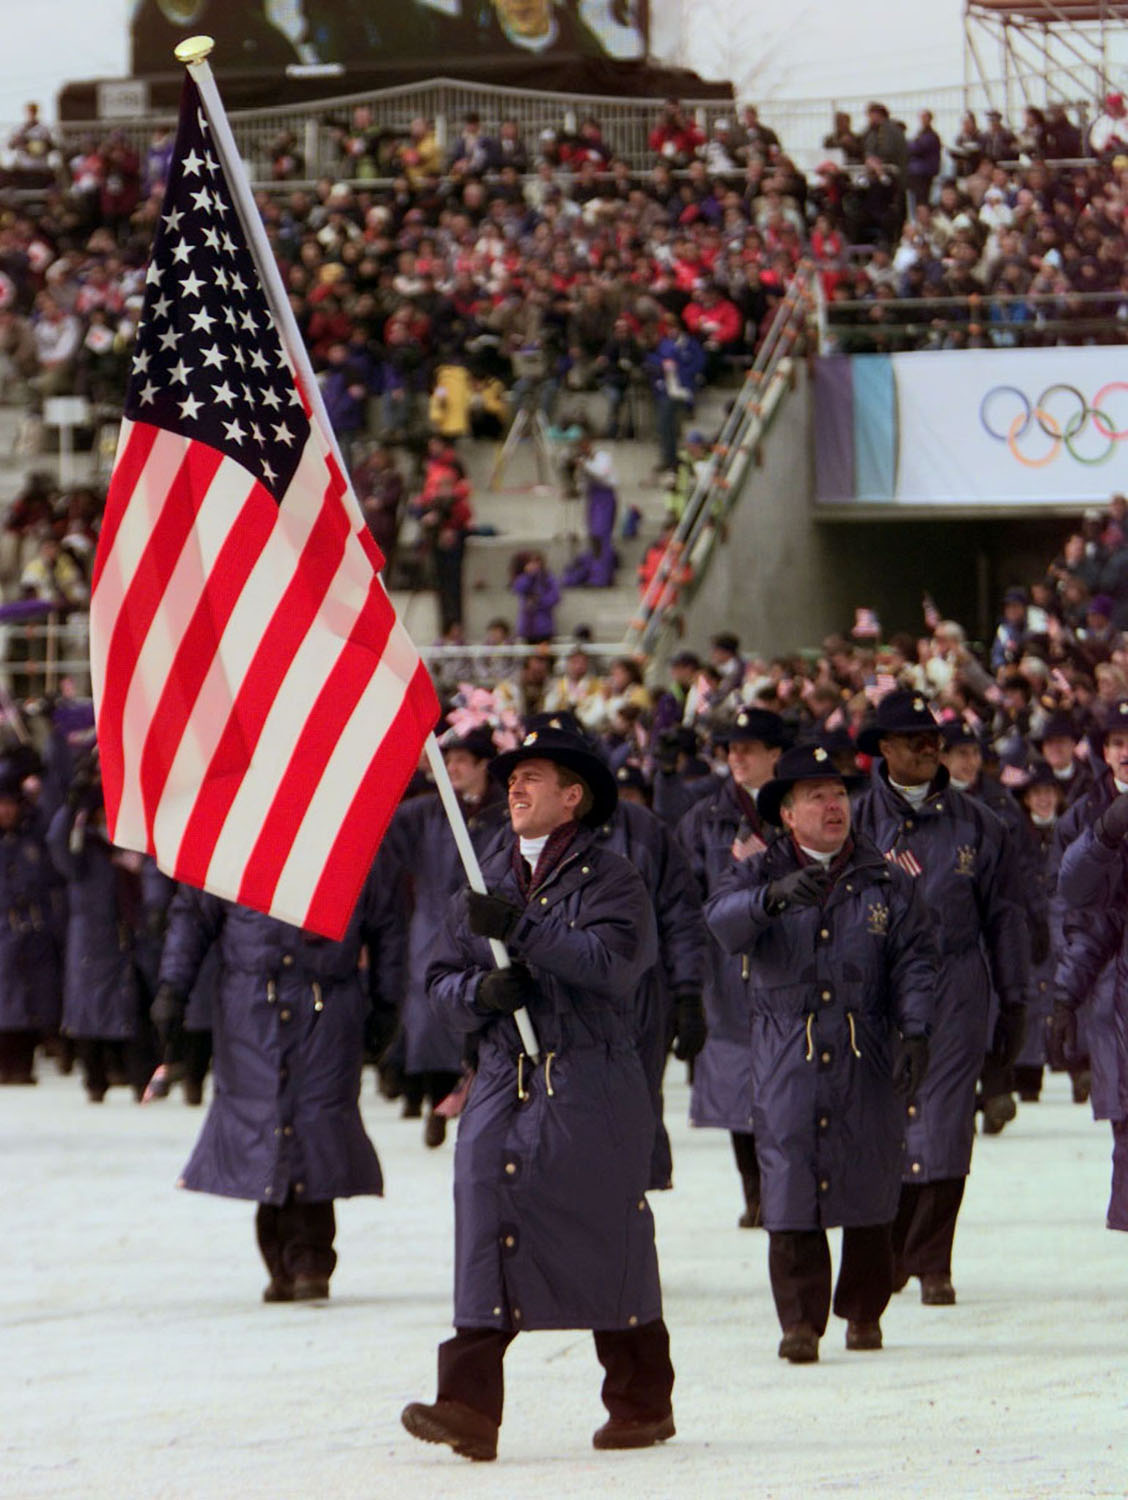 Four-time Olympic speed skater Eric Flaim carries the United States flag into the Olympic Stadium in Nagano, Japan, as he leads his team into the 1998 Winter Olympic Games opening ceremony.